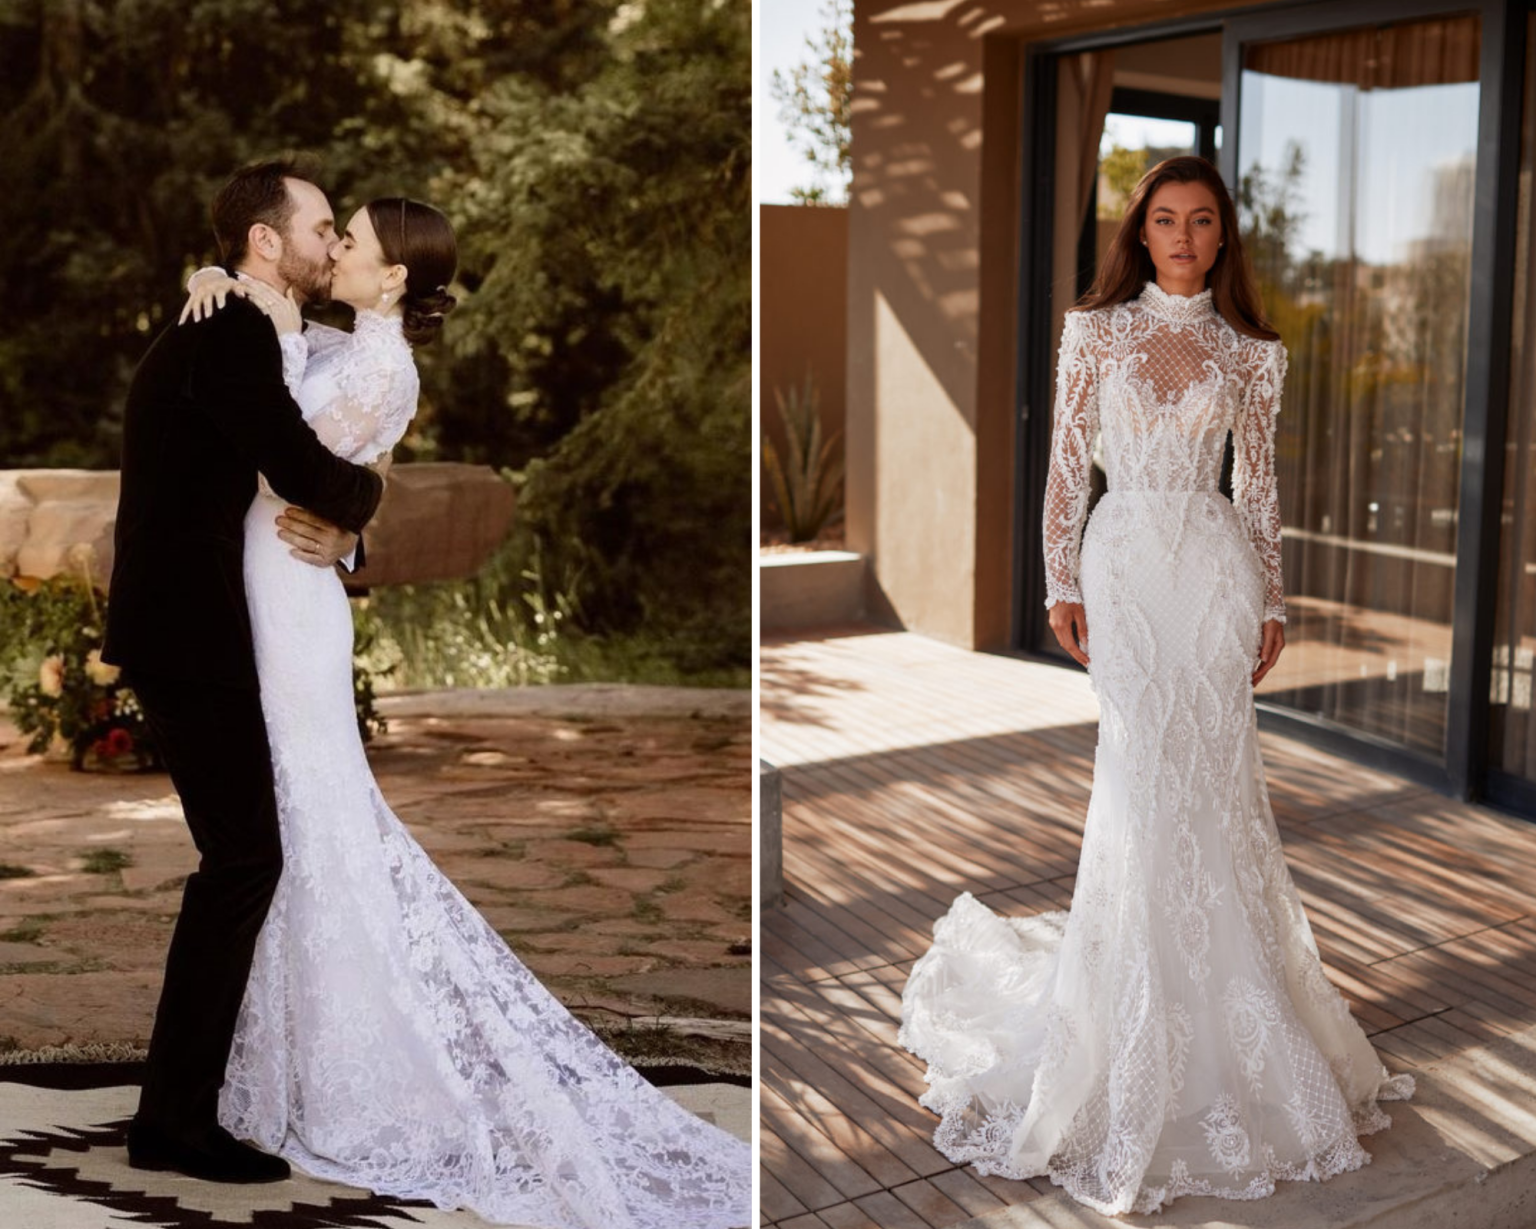 Get The Look: 9 Sleeve Wedding Dresses Inspired by Lily Collins ...